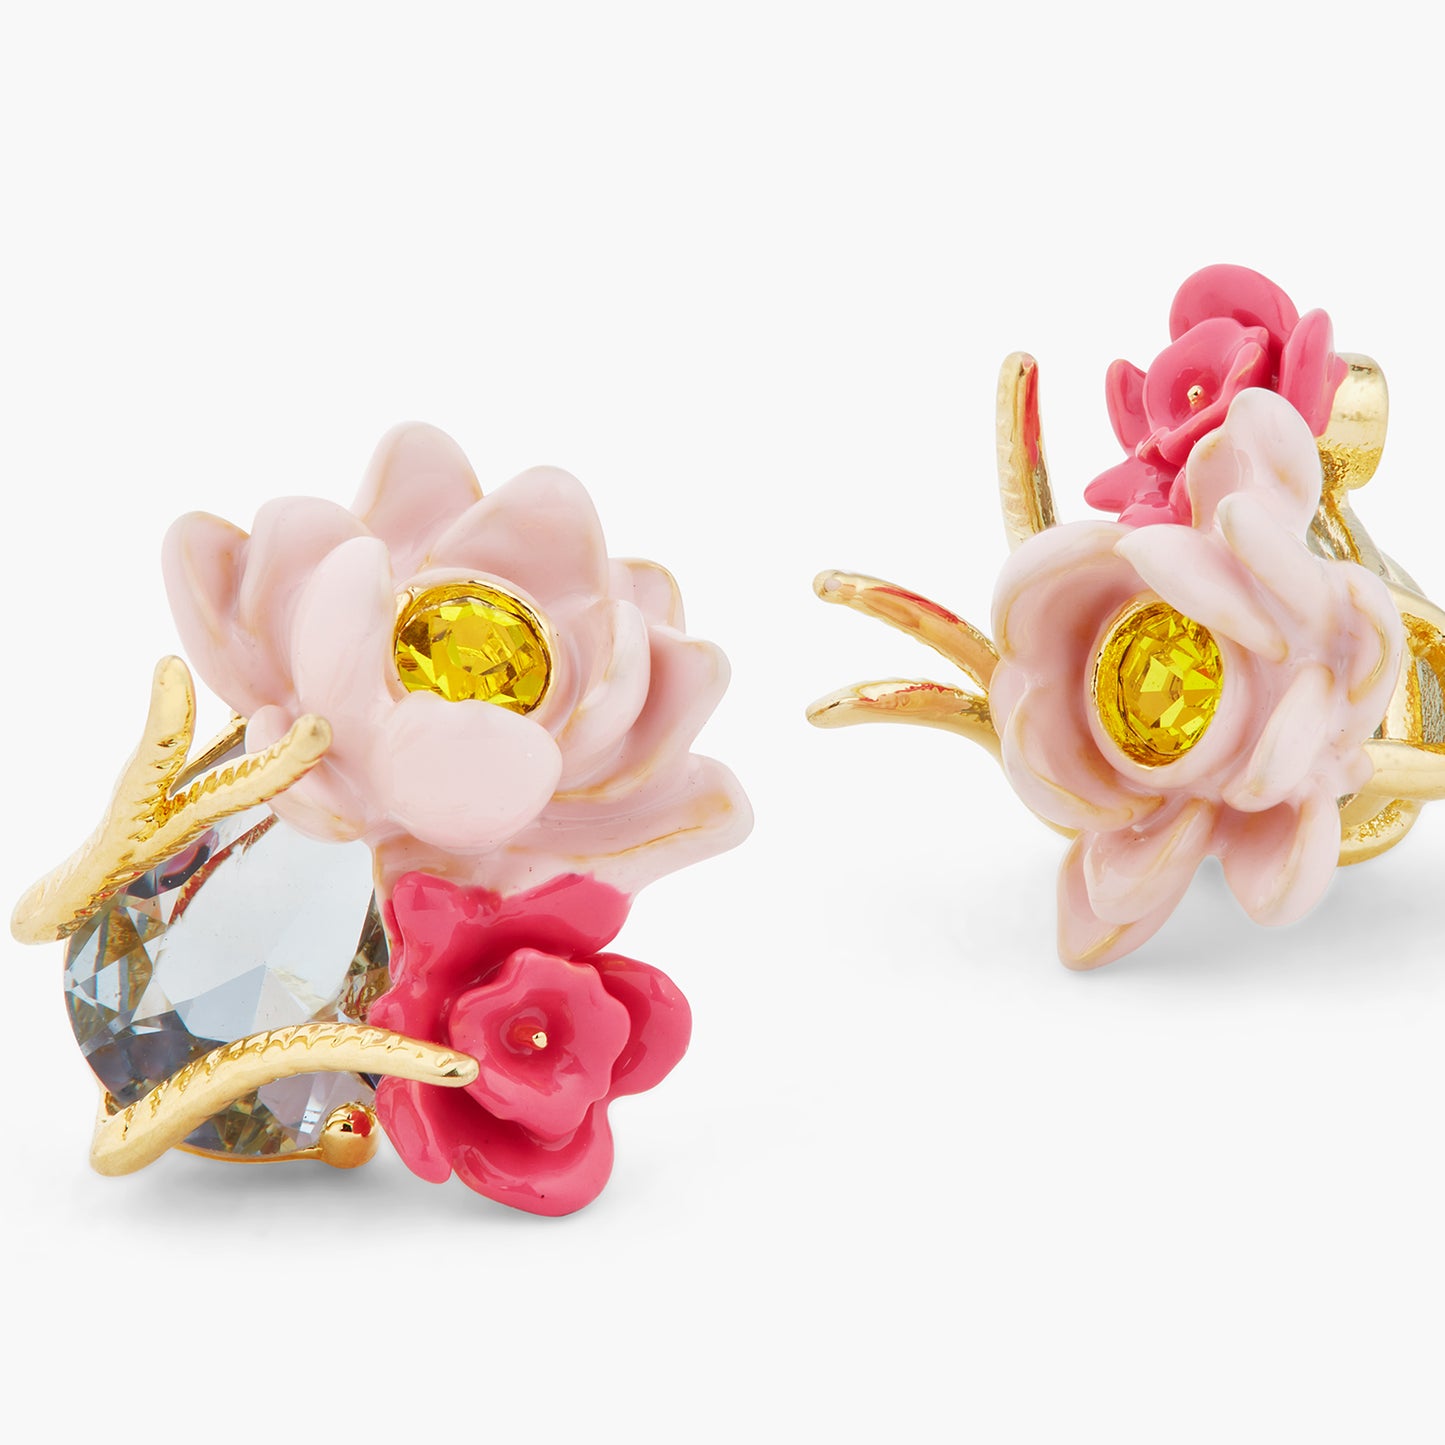 Pink lotus and light blue stone earrings | ASOS1061